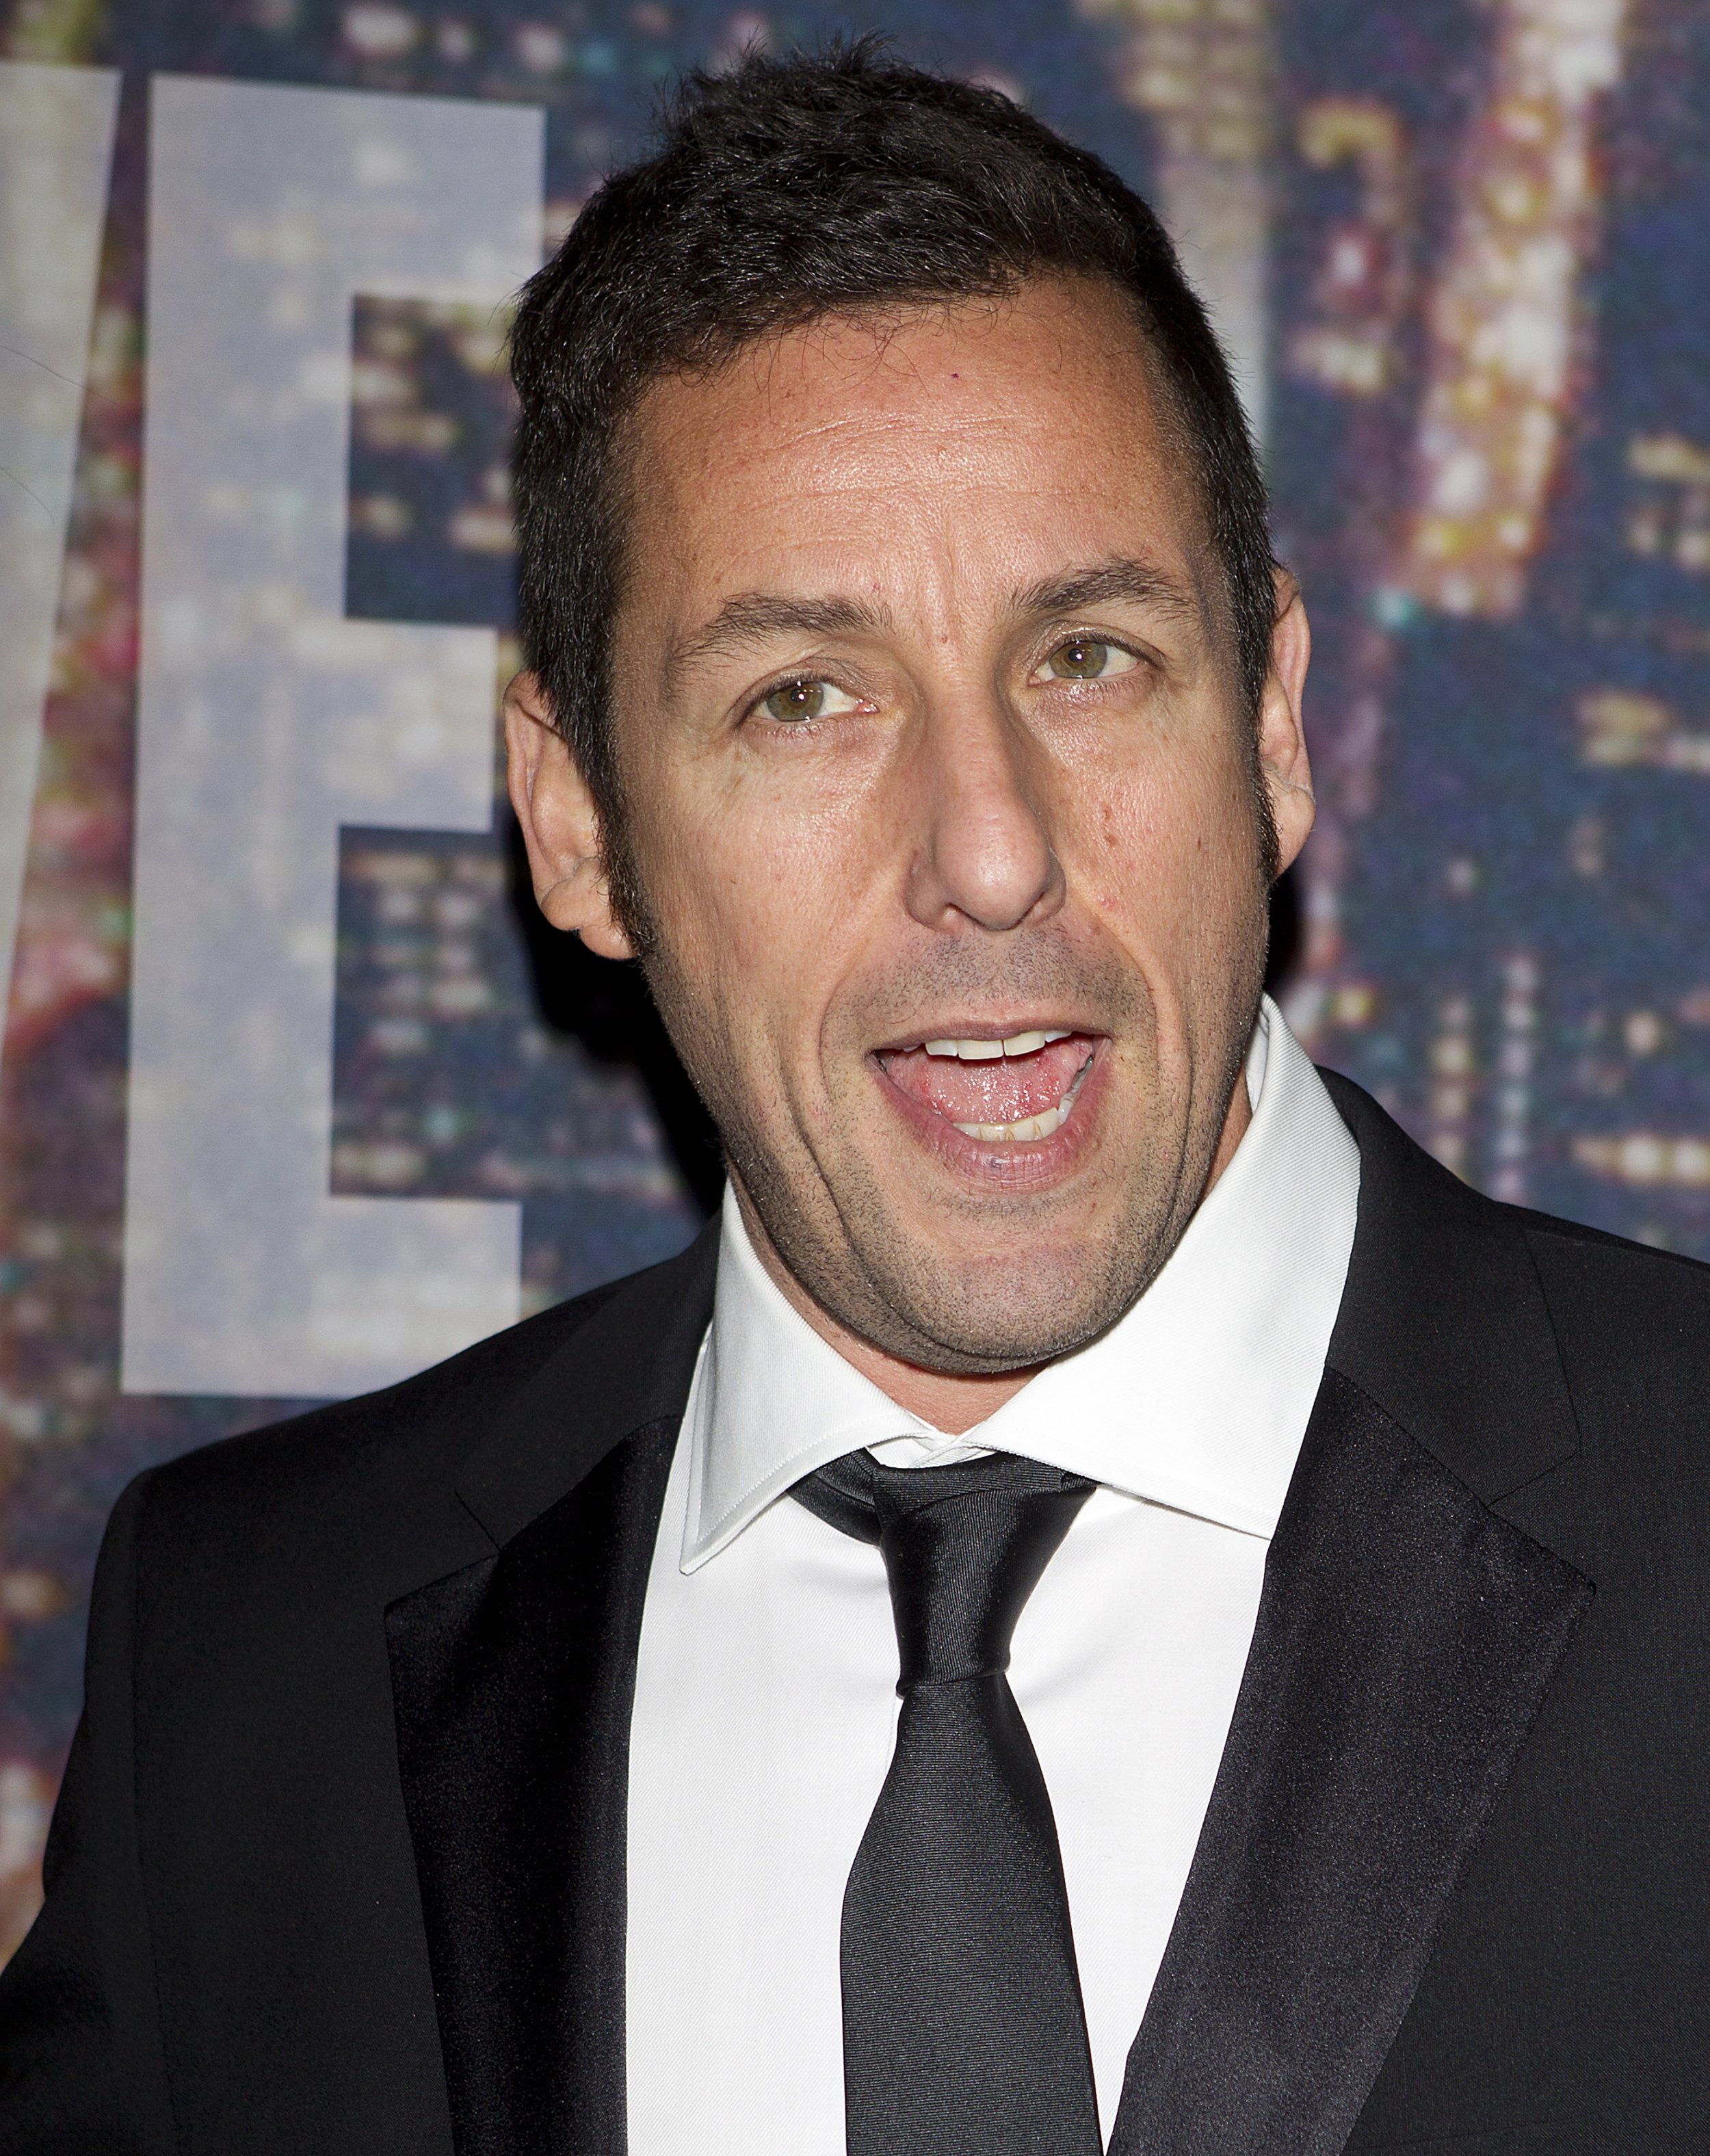 Adam Sandler Netflix Movie Ridiculous 6 Offends Native American Cast With Insensitivity Ibtimes